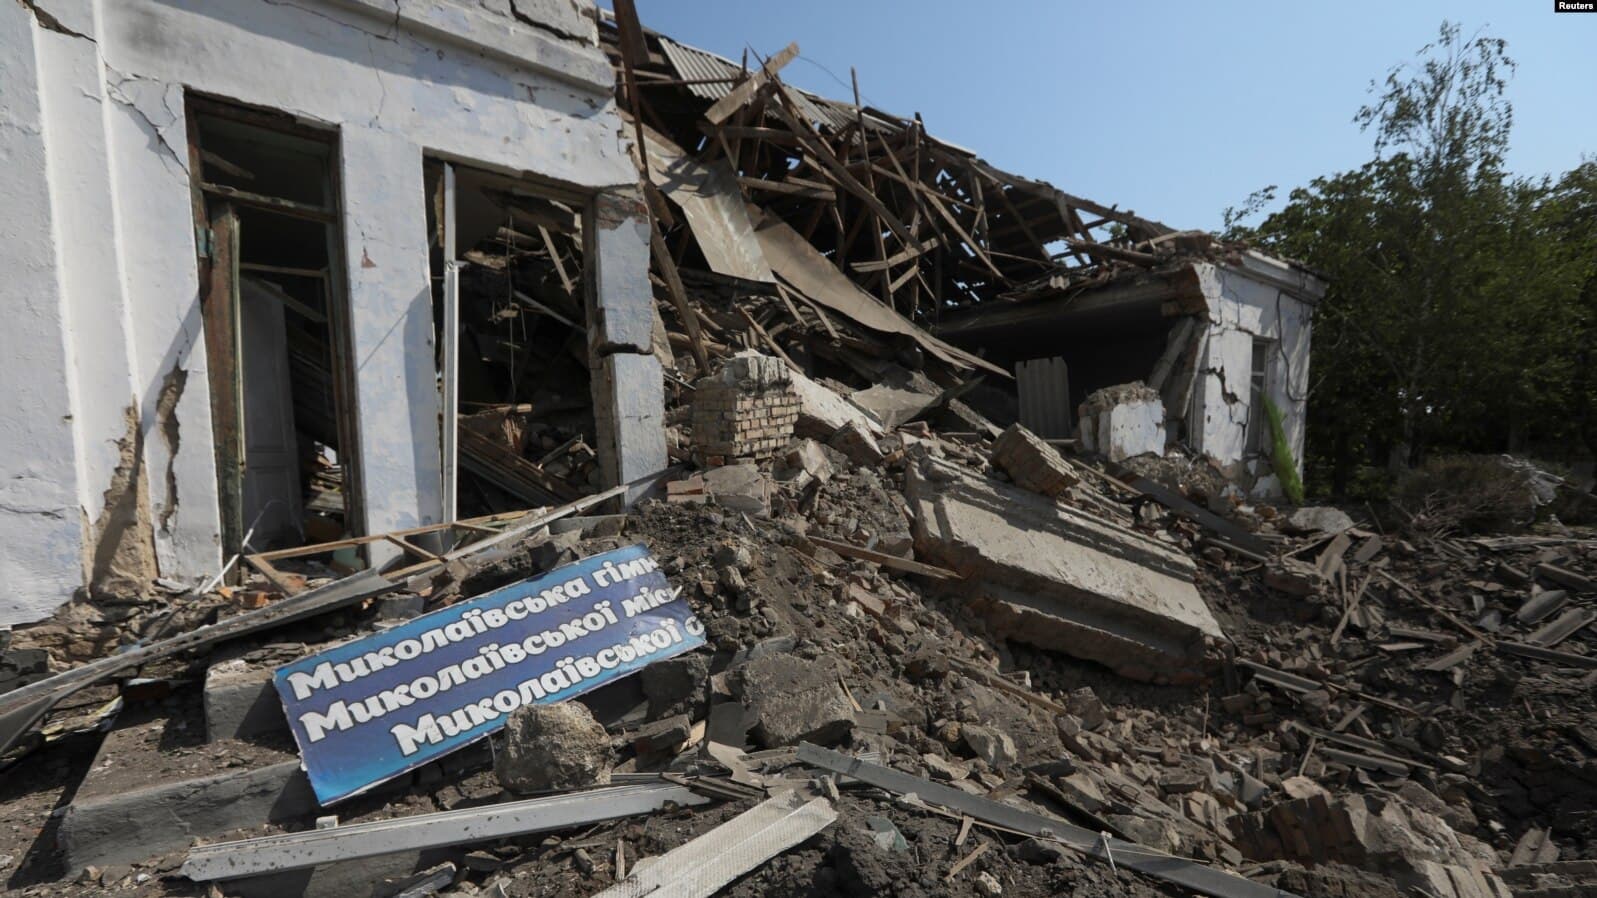 A school in Mykolaiv damaged by a Russian missile